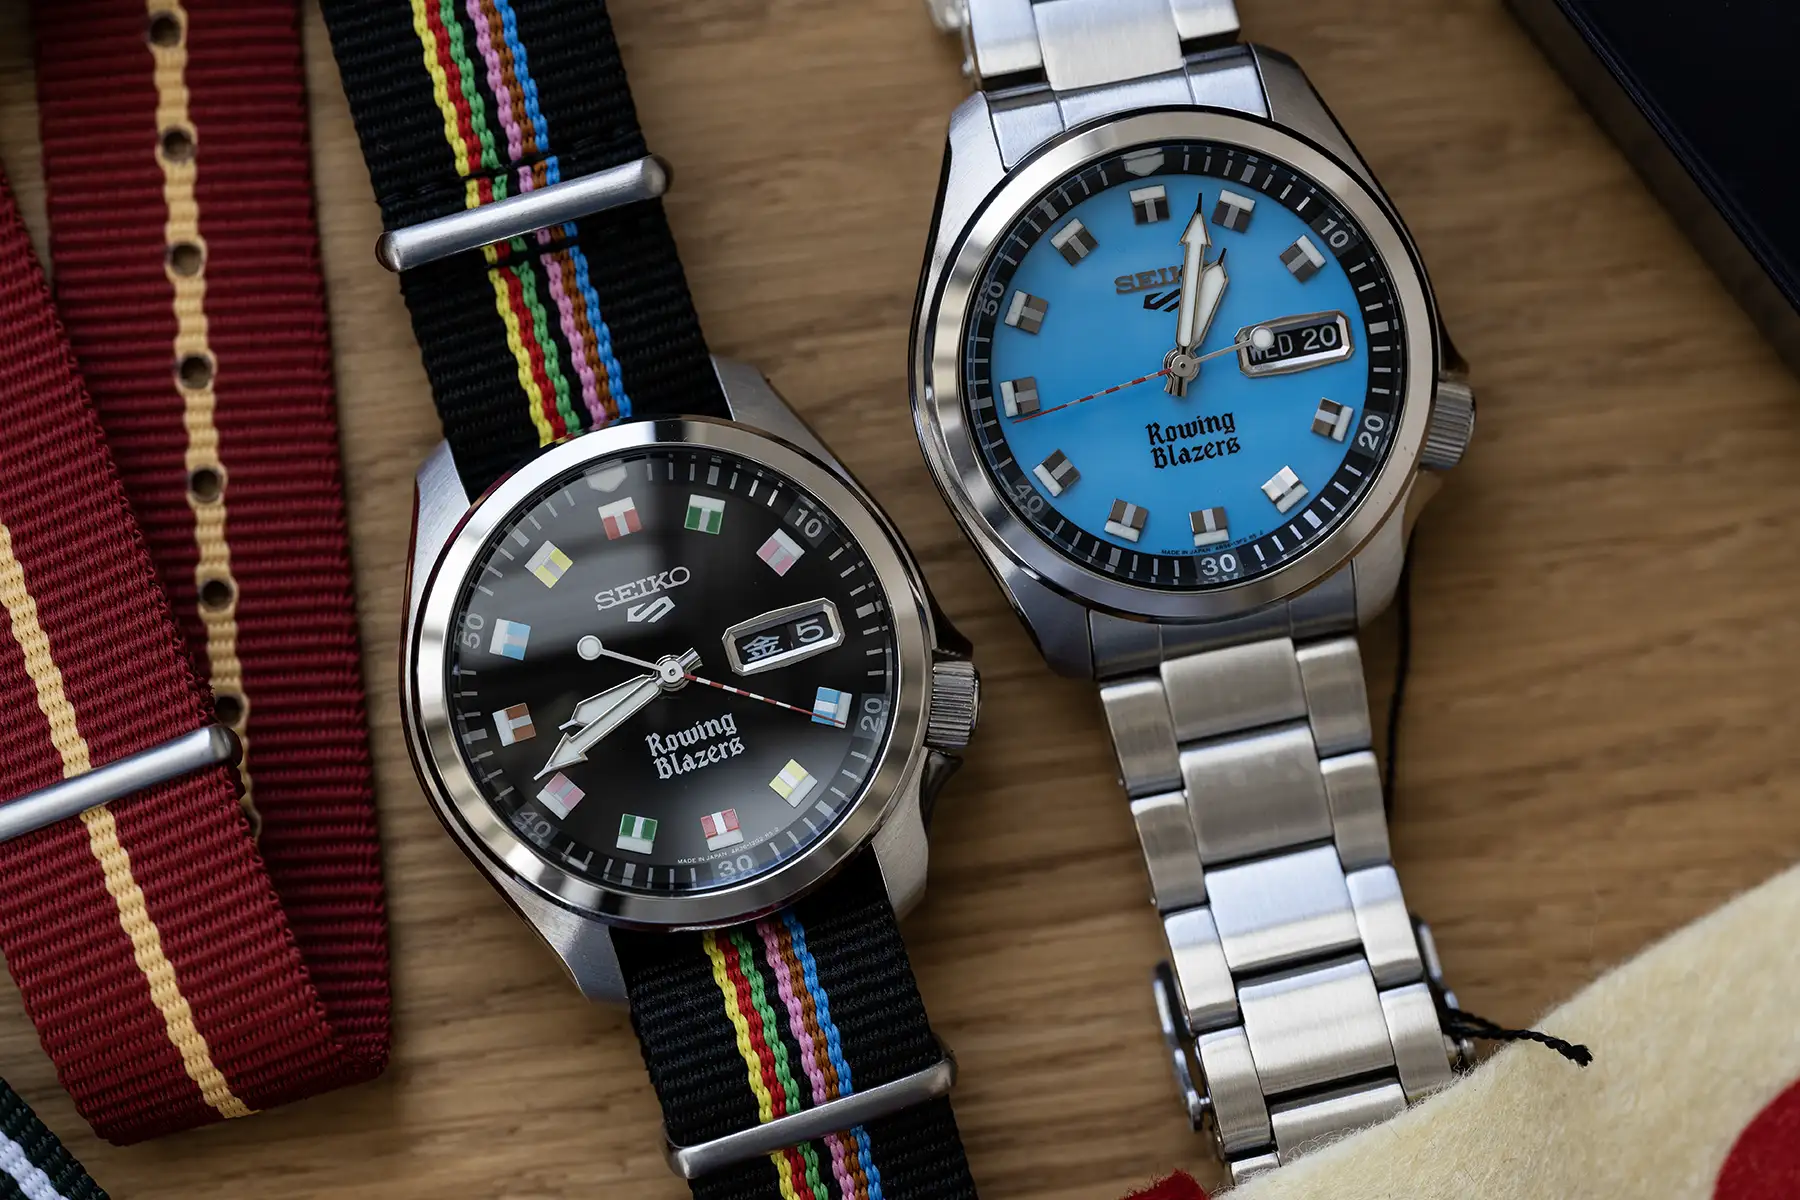 Seiko Reconnects with Rowing Blazers, Once Again Colliding the Worlds of Sport Watches and Contemporary Apparel